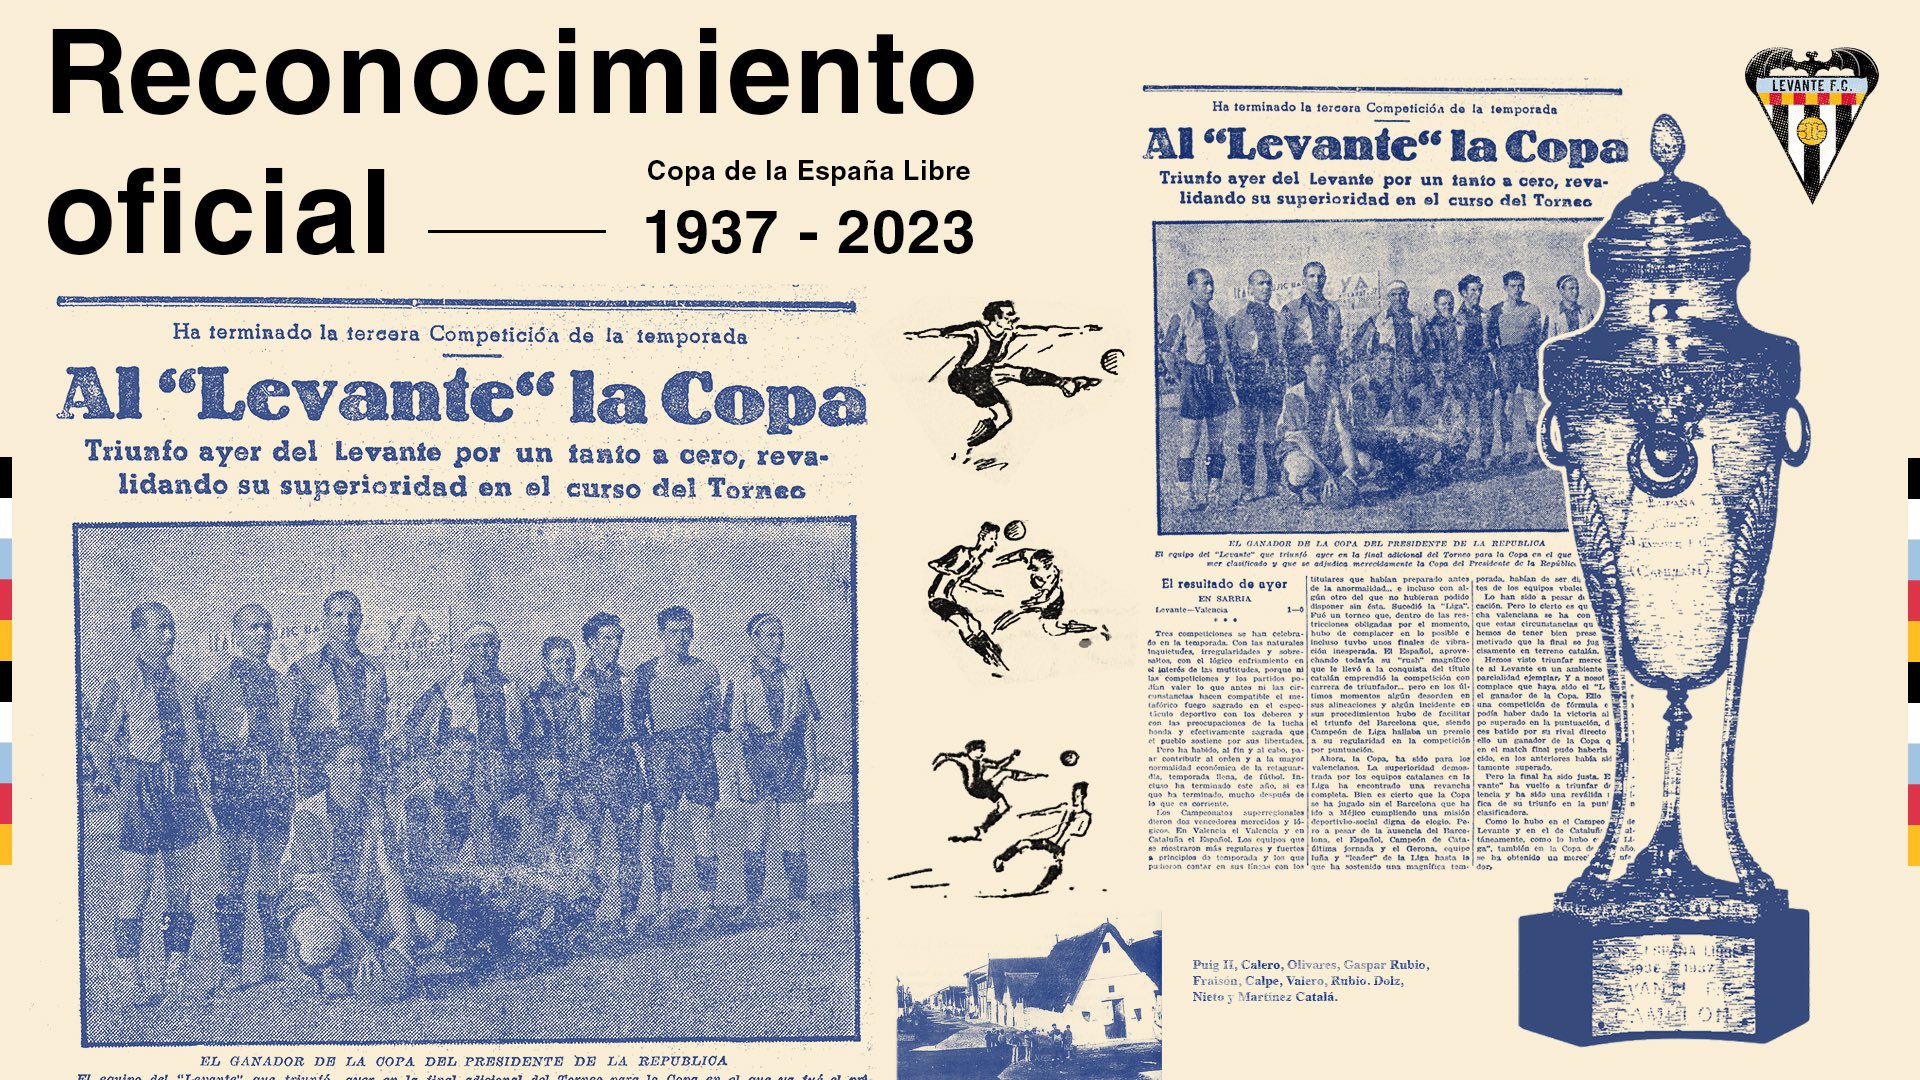 The historical record of the Copa del Rey champions